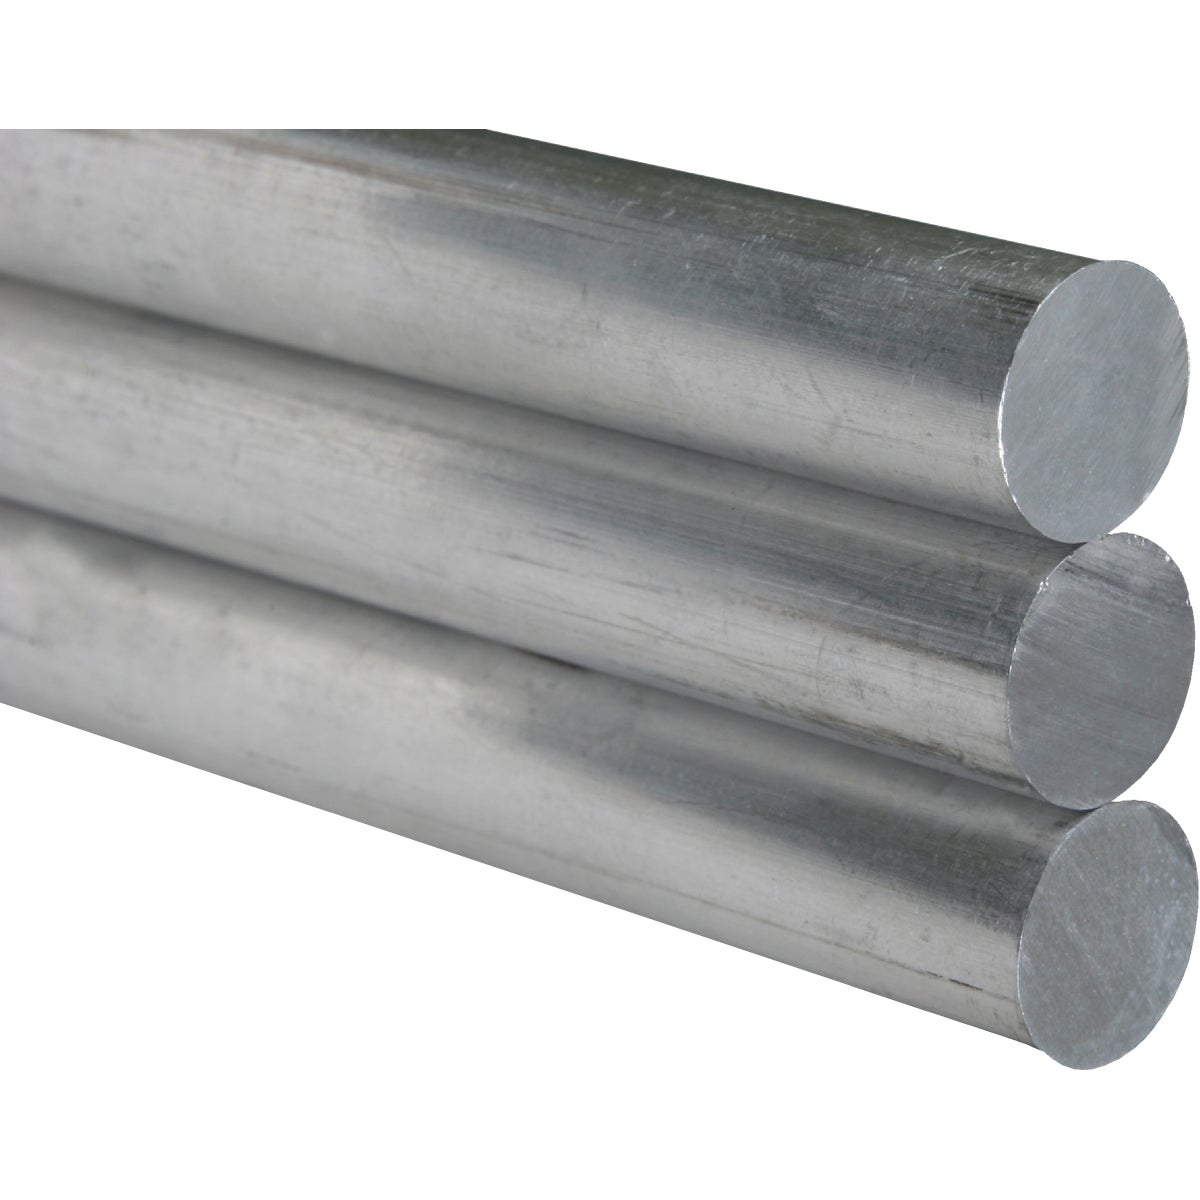 K&S 1/8 In. x 12 In. Solid Stainless Steel Rod